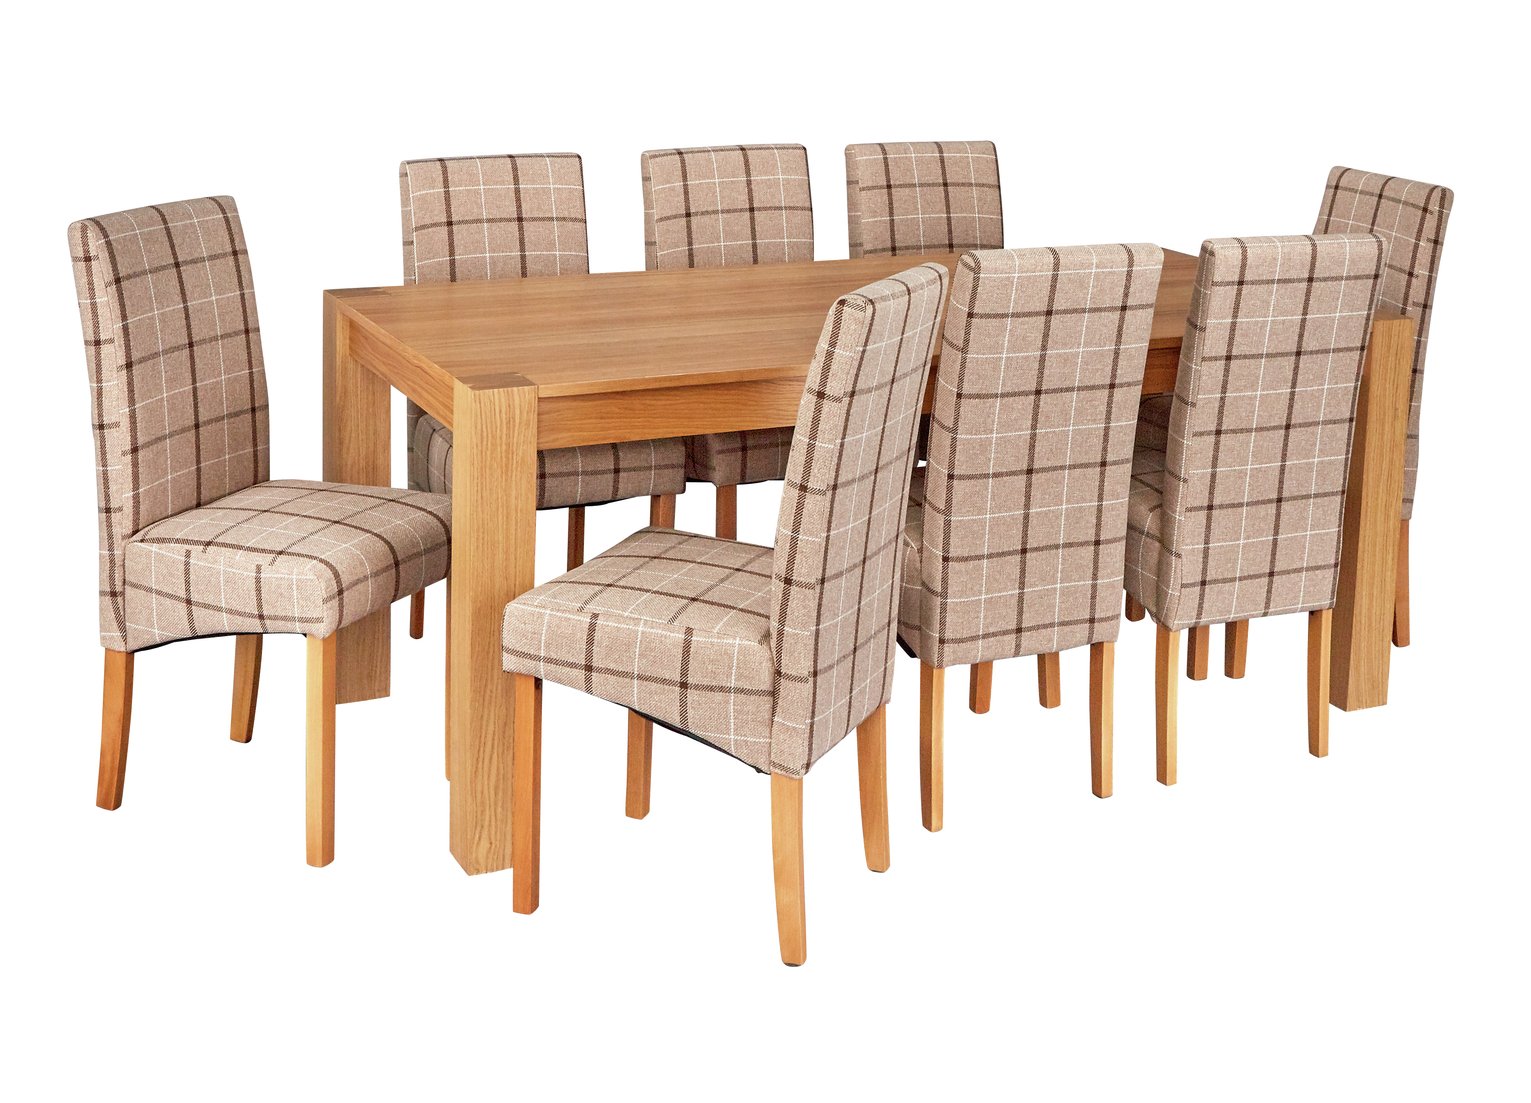 Argos Home Alston Oak Veneer Table and 8 Chairs - Mink Check